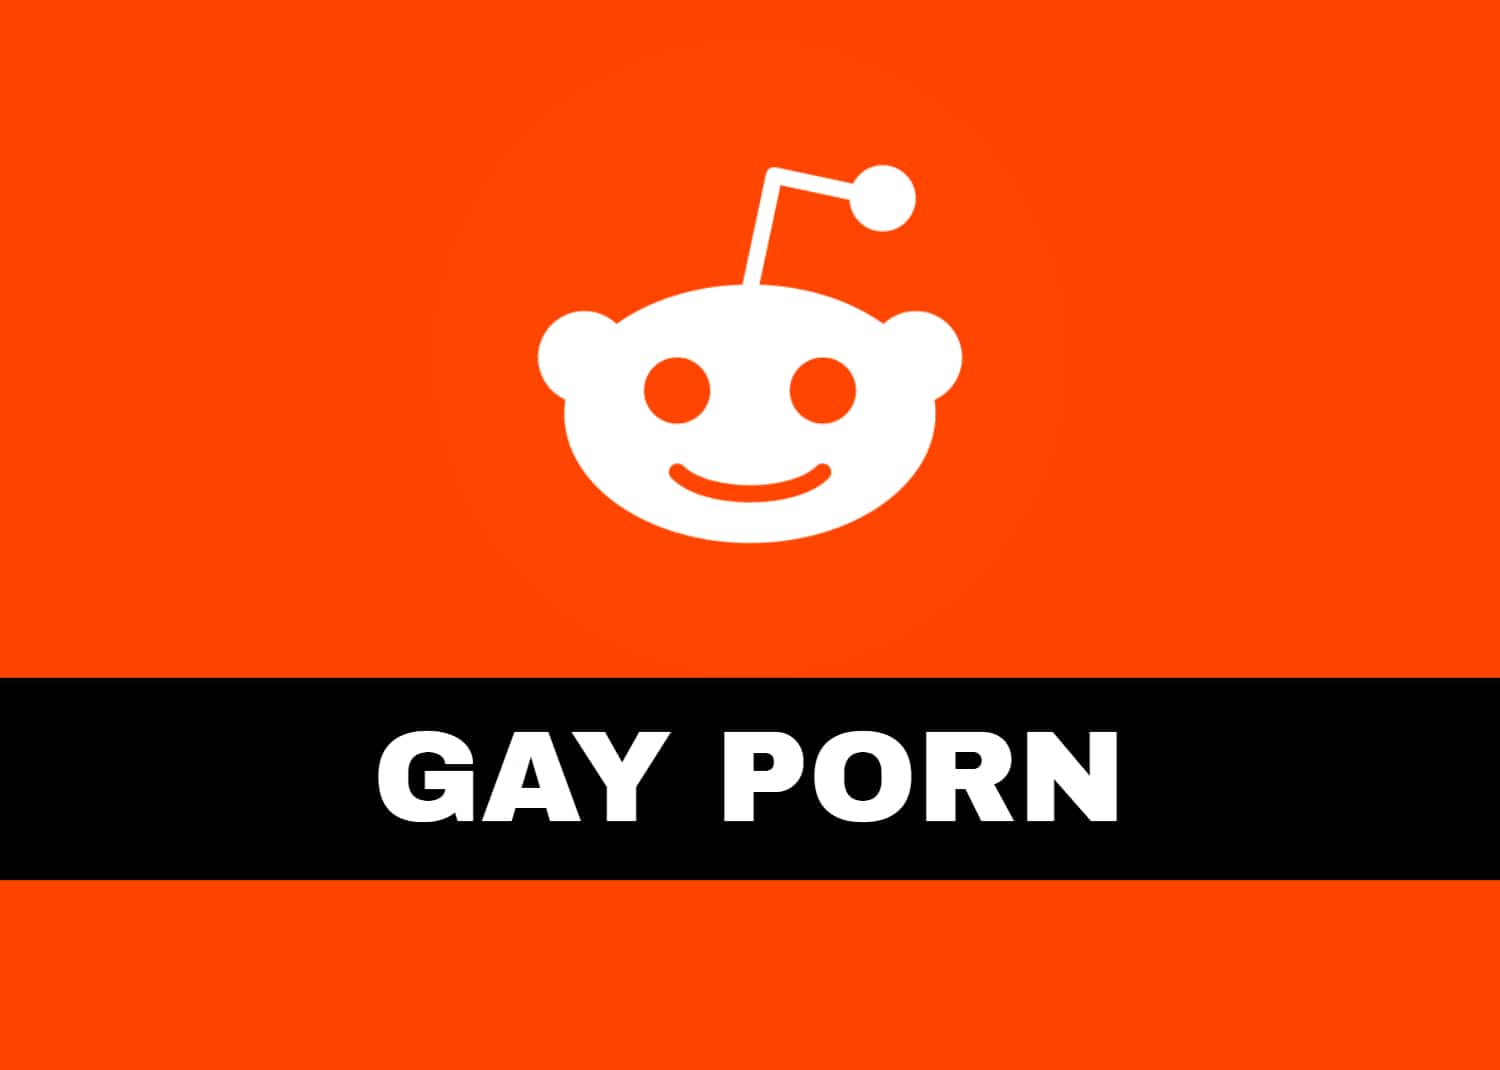 Gay Porn: The largest group for gay porn on Reddit